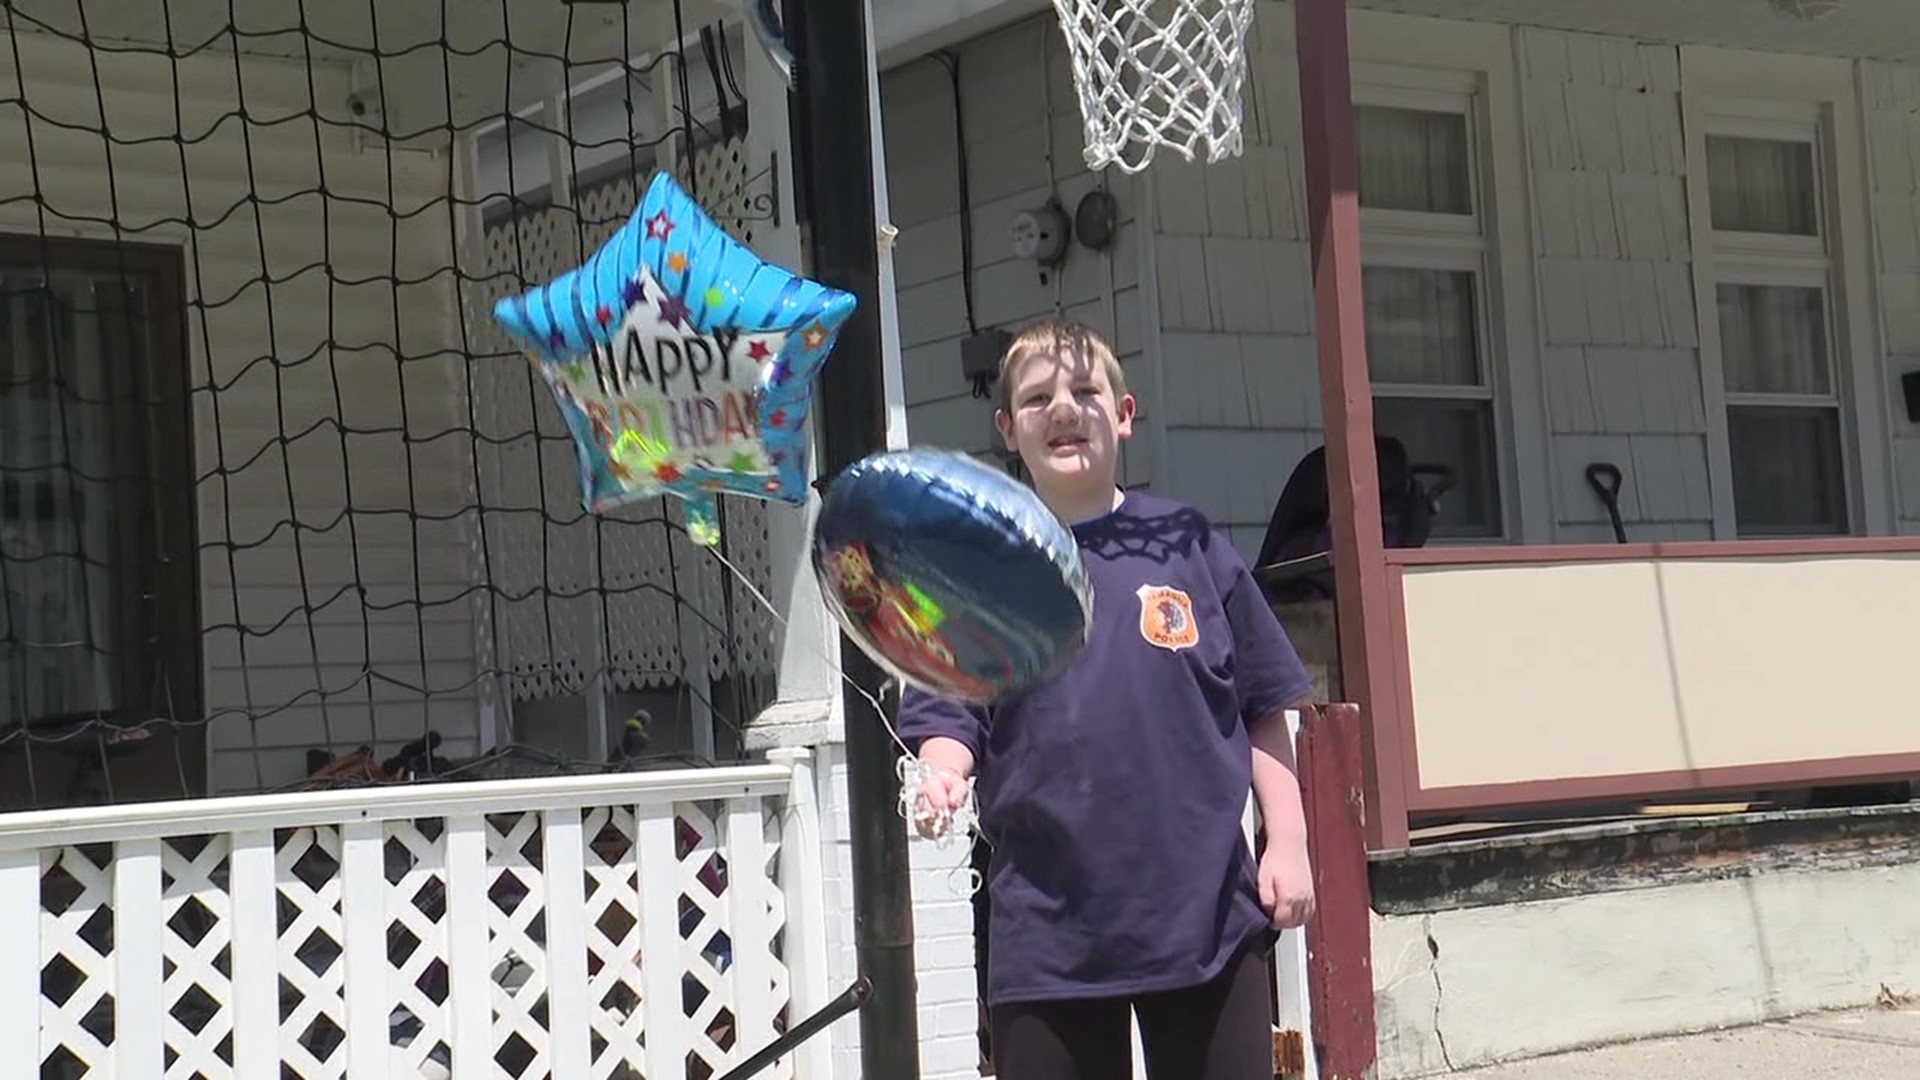 A boy from Tamaqua who has autism turned 11 years old on Thursday and he got to celebrate with a big parade.